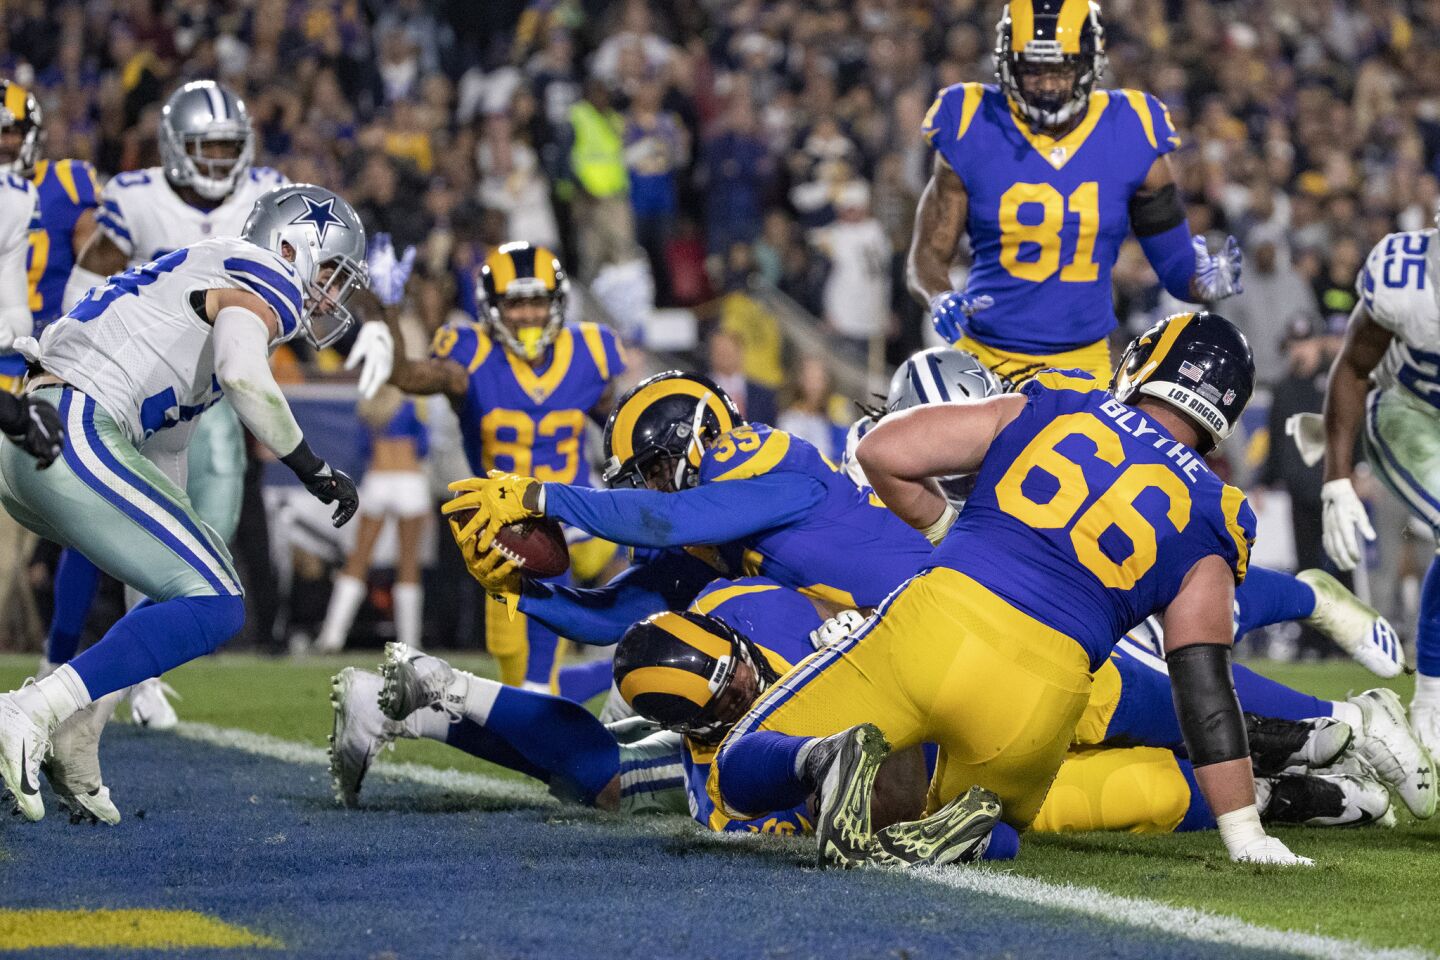 Rams running back C.J. Anderson (35) reaches over the goal line to give the Rams a 13-7 lead in the second quarter.